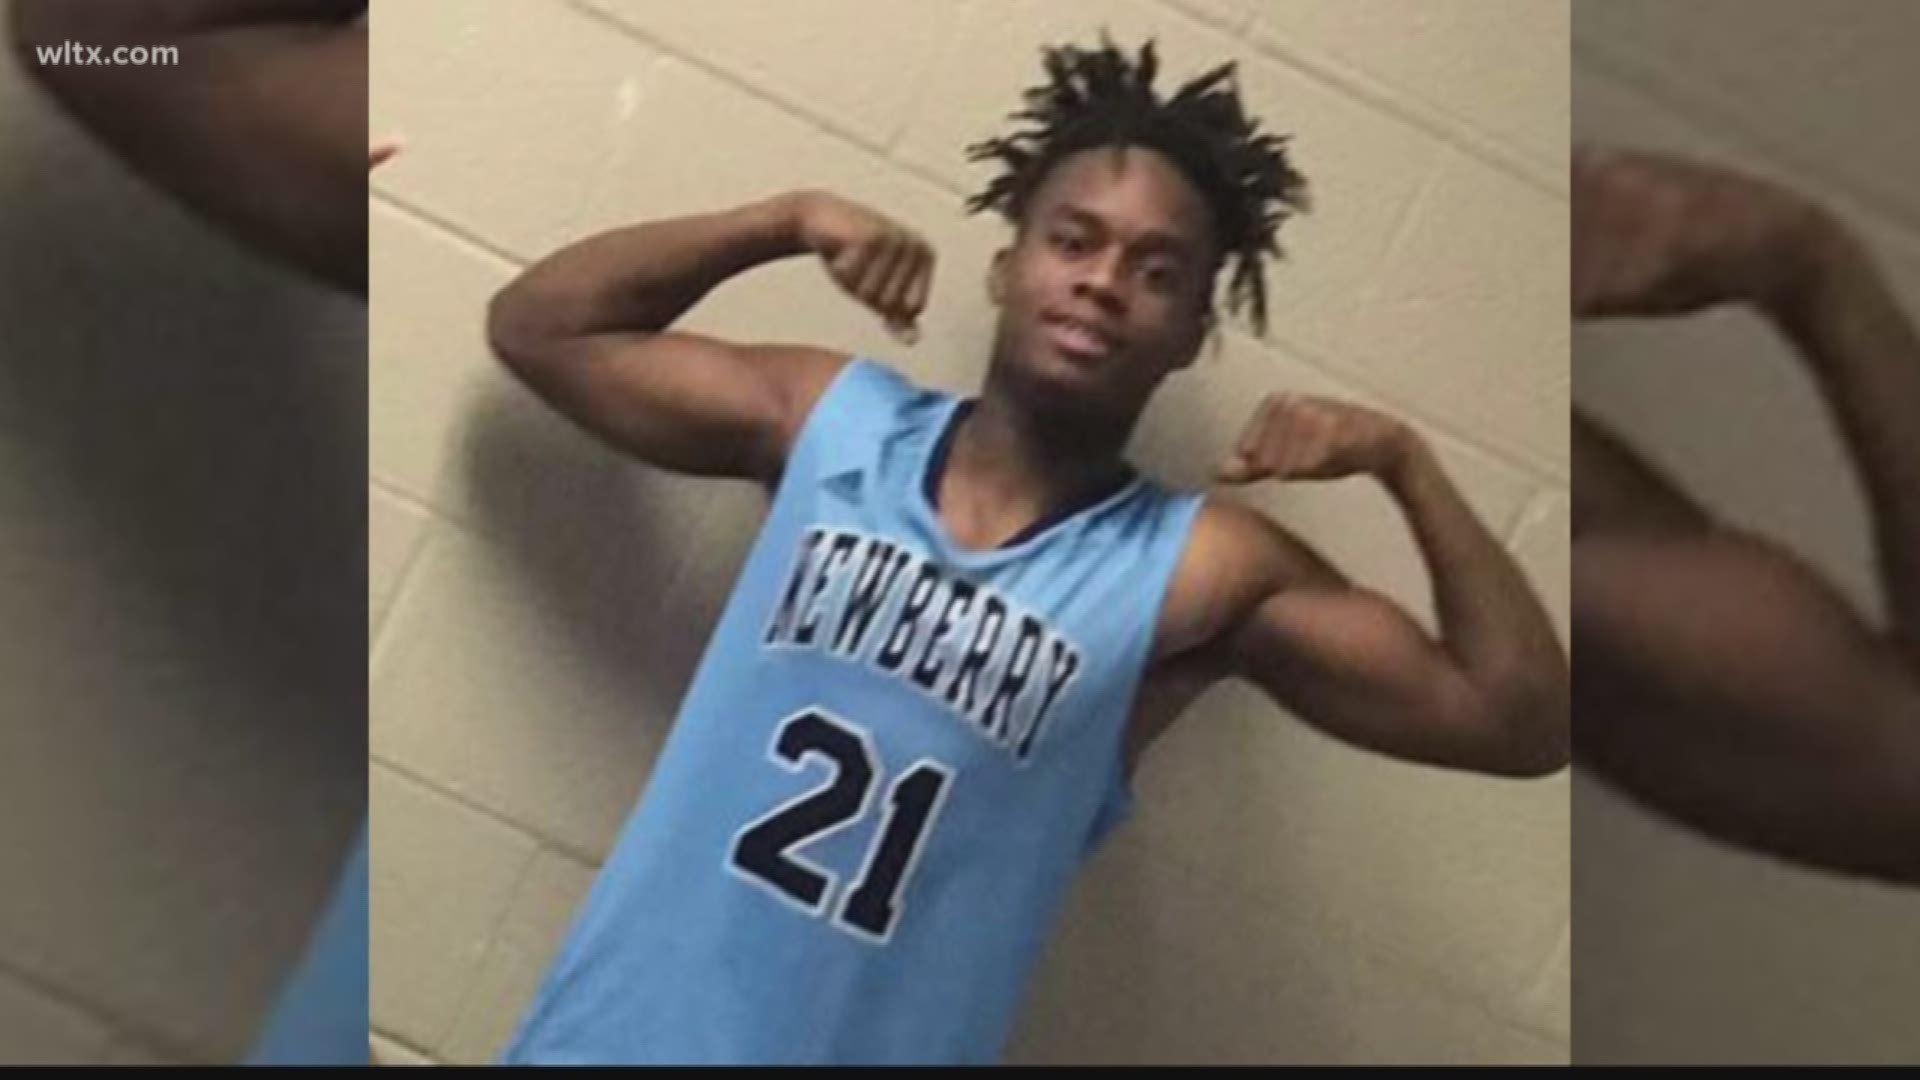 Davonte Ruff died in a car accident last week.  He was a well loved student at Newberry high school and played both football and basketball.